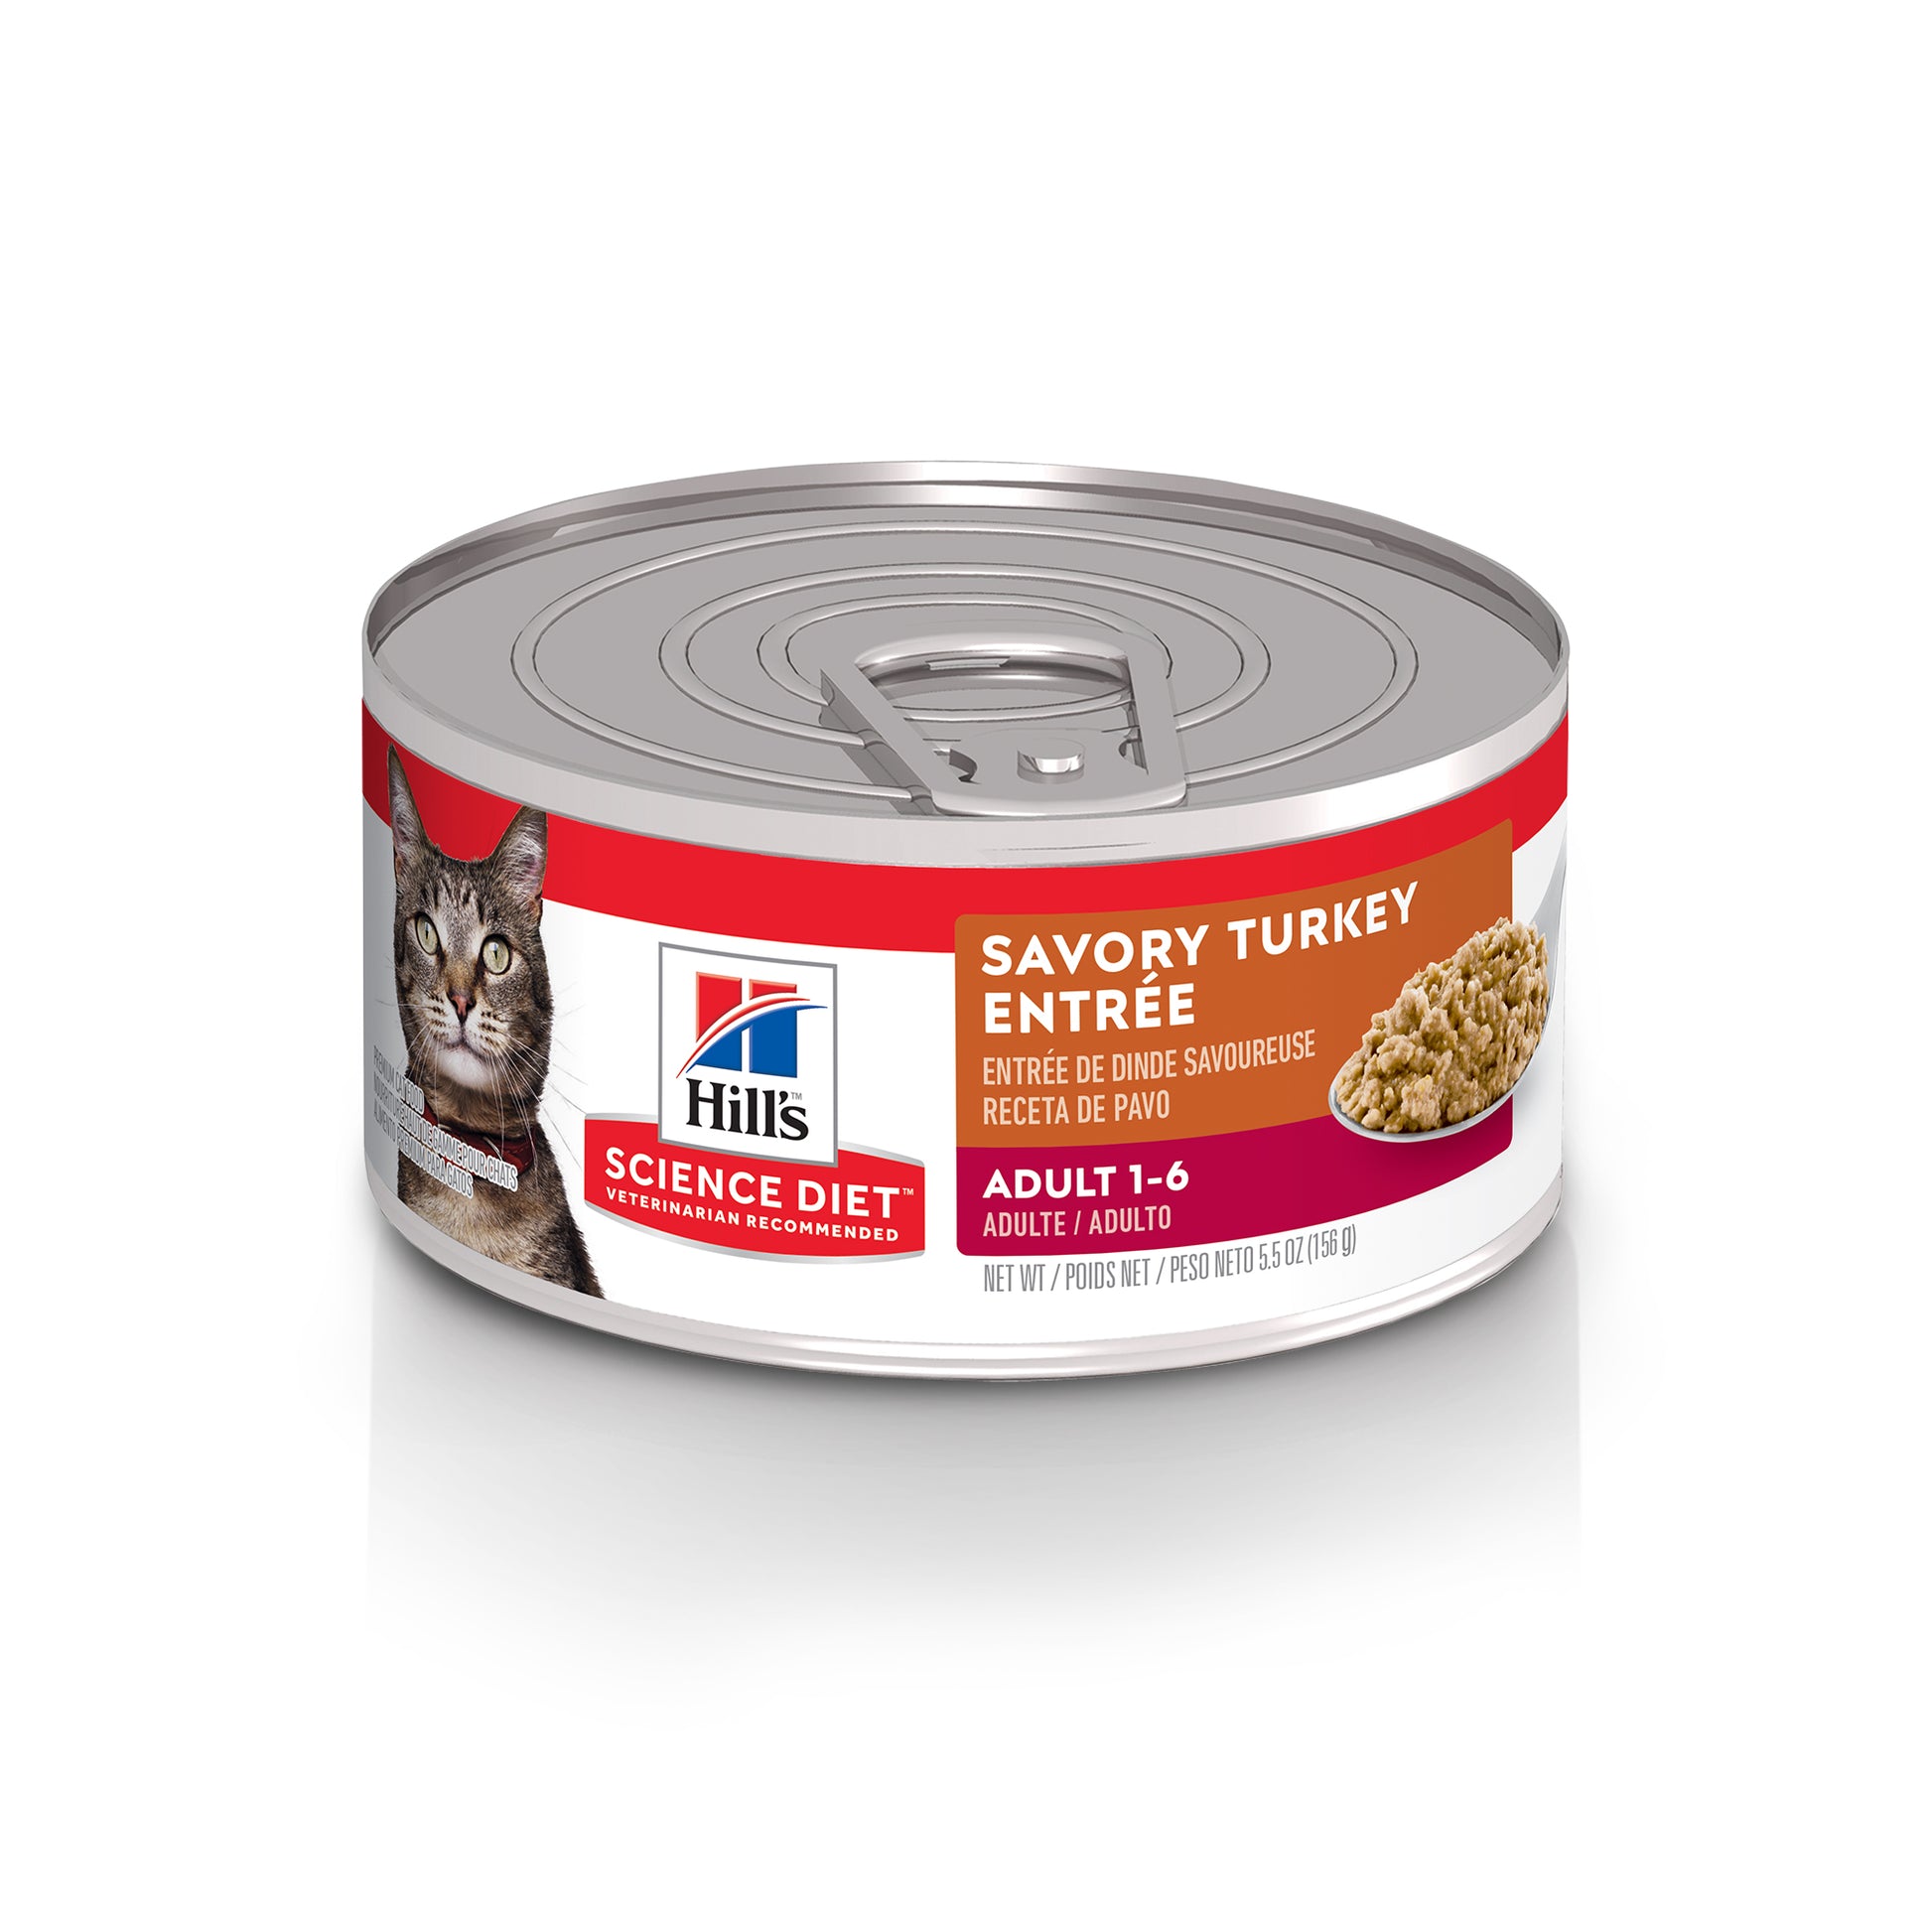 Hill's Science Diet Canned Cat Food Adult Turkey Entrée  Canned Cat Food  | PetMax Canada